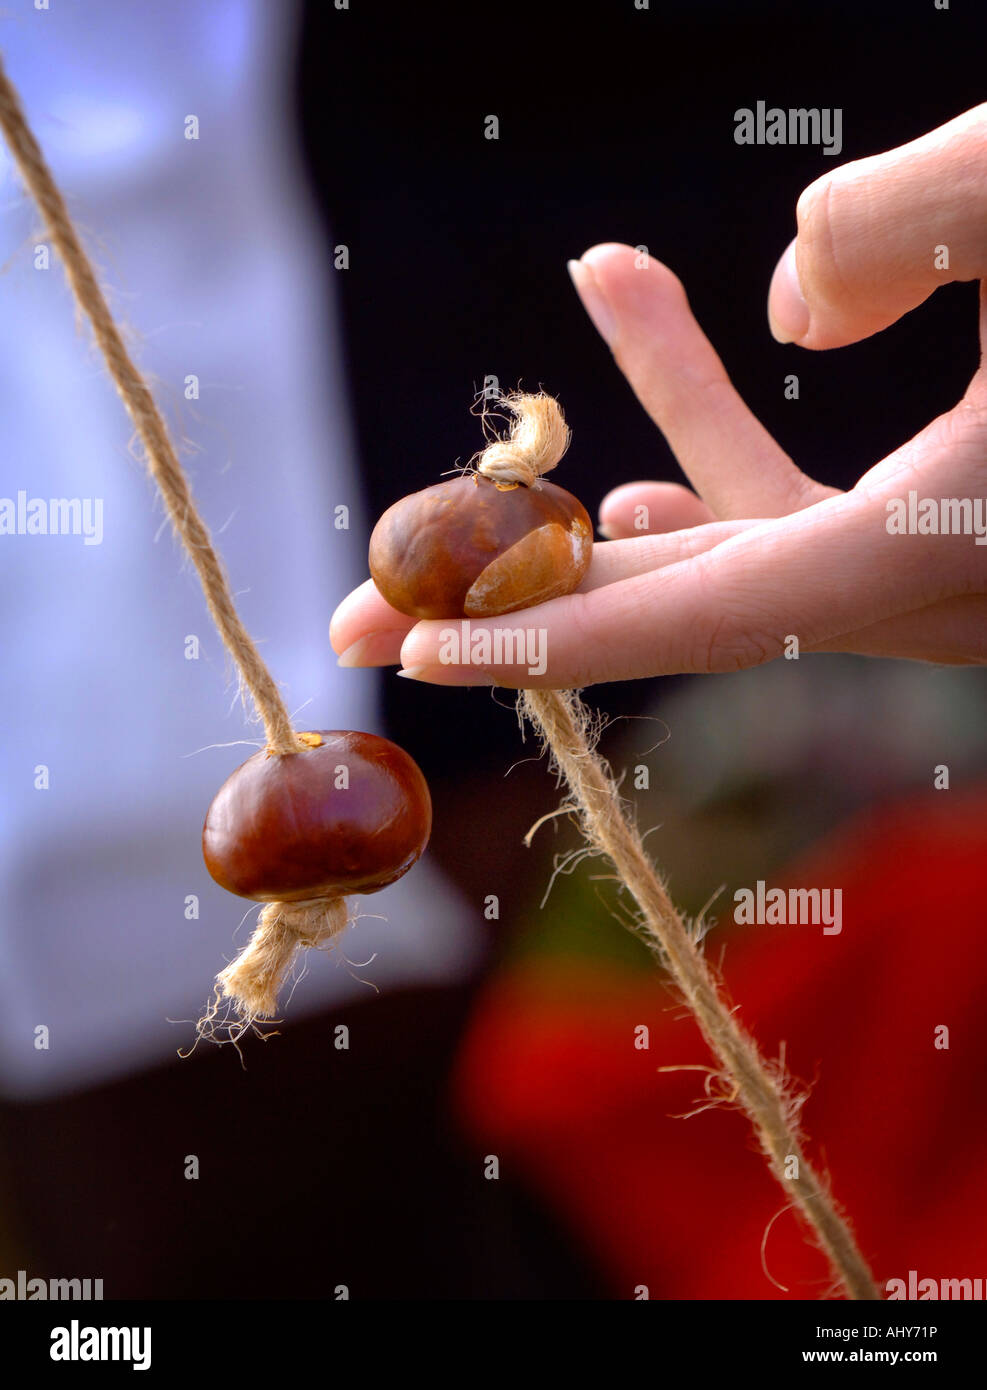 Hands draw the string tight as a game of conkers begins in Ferring, West Sussex. Picture by Jim Holden. Stock Photo